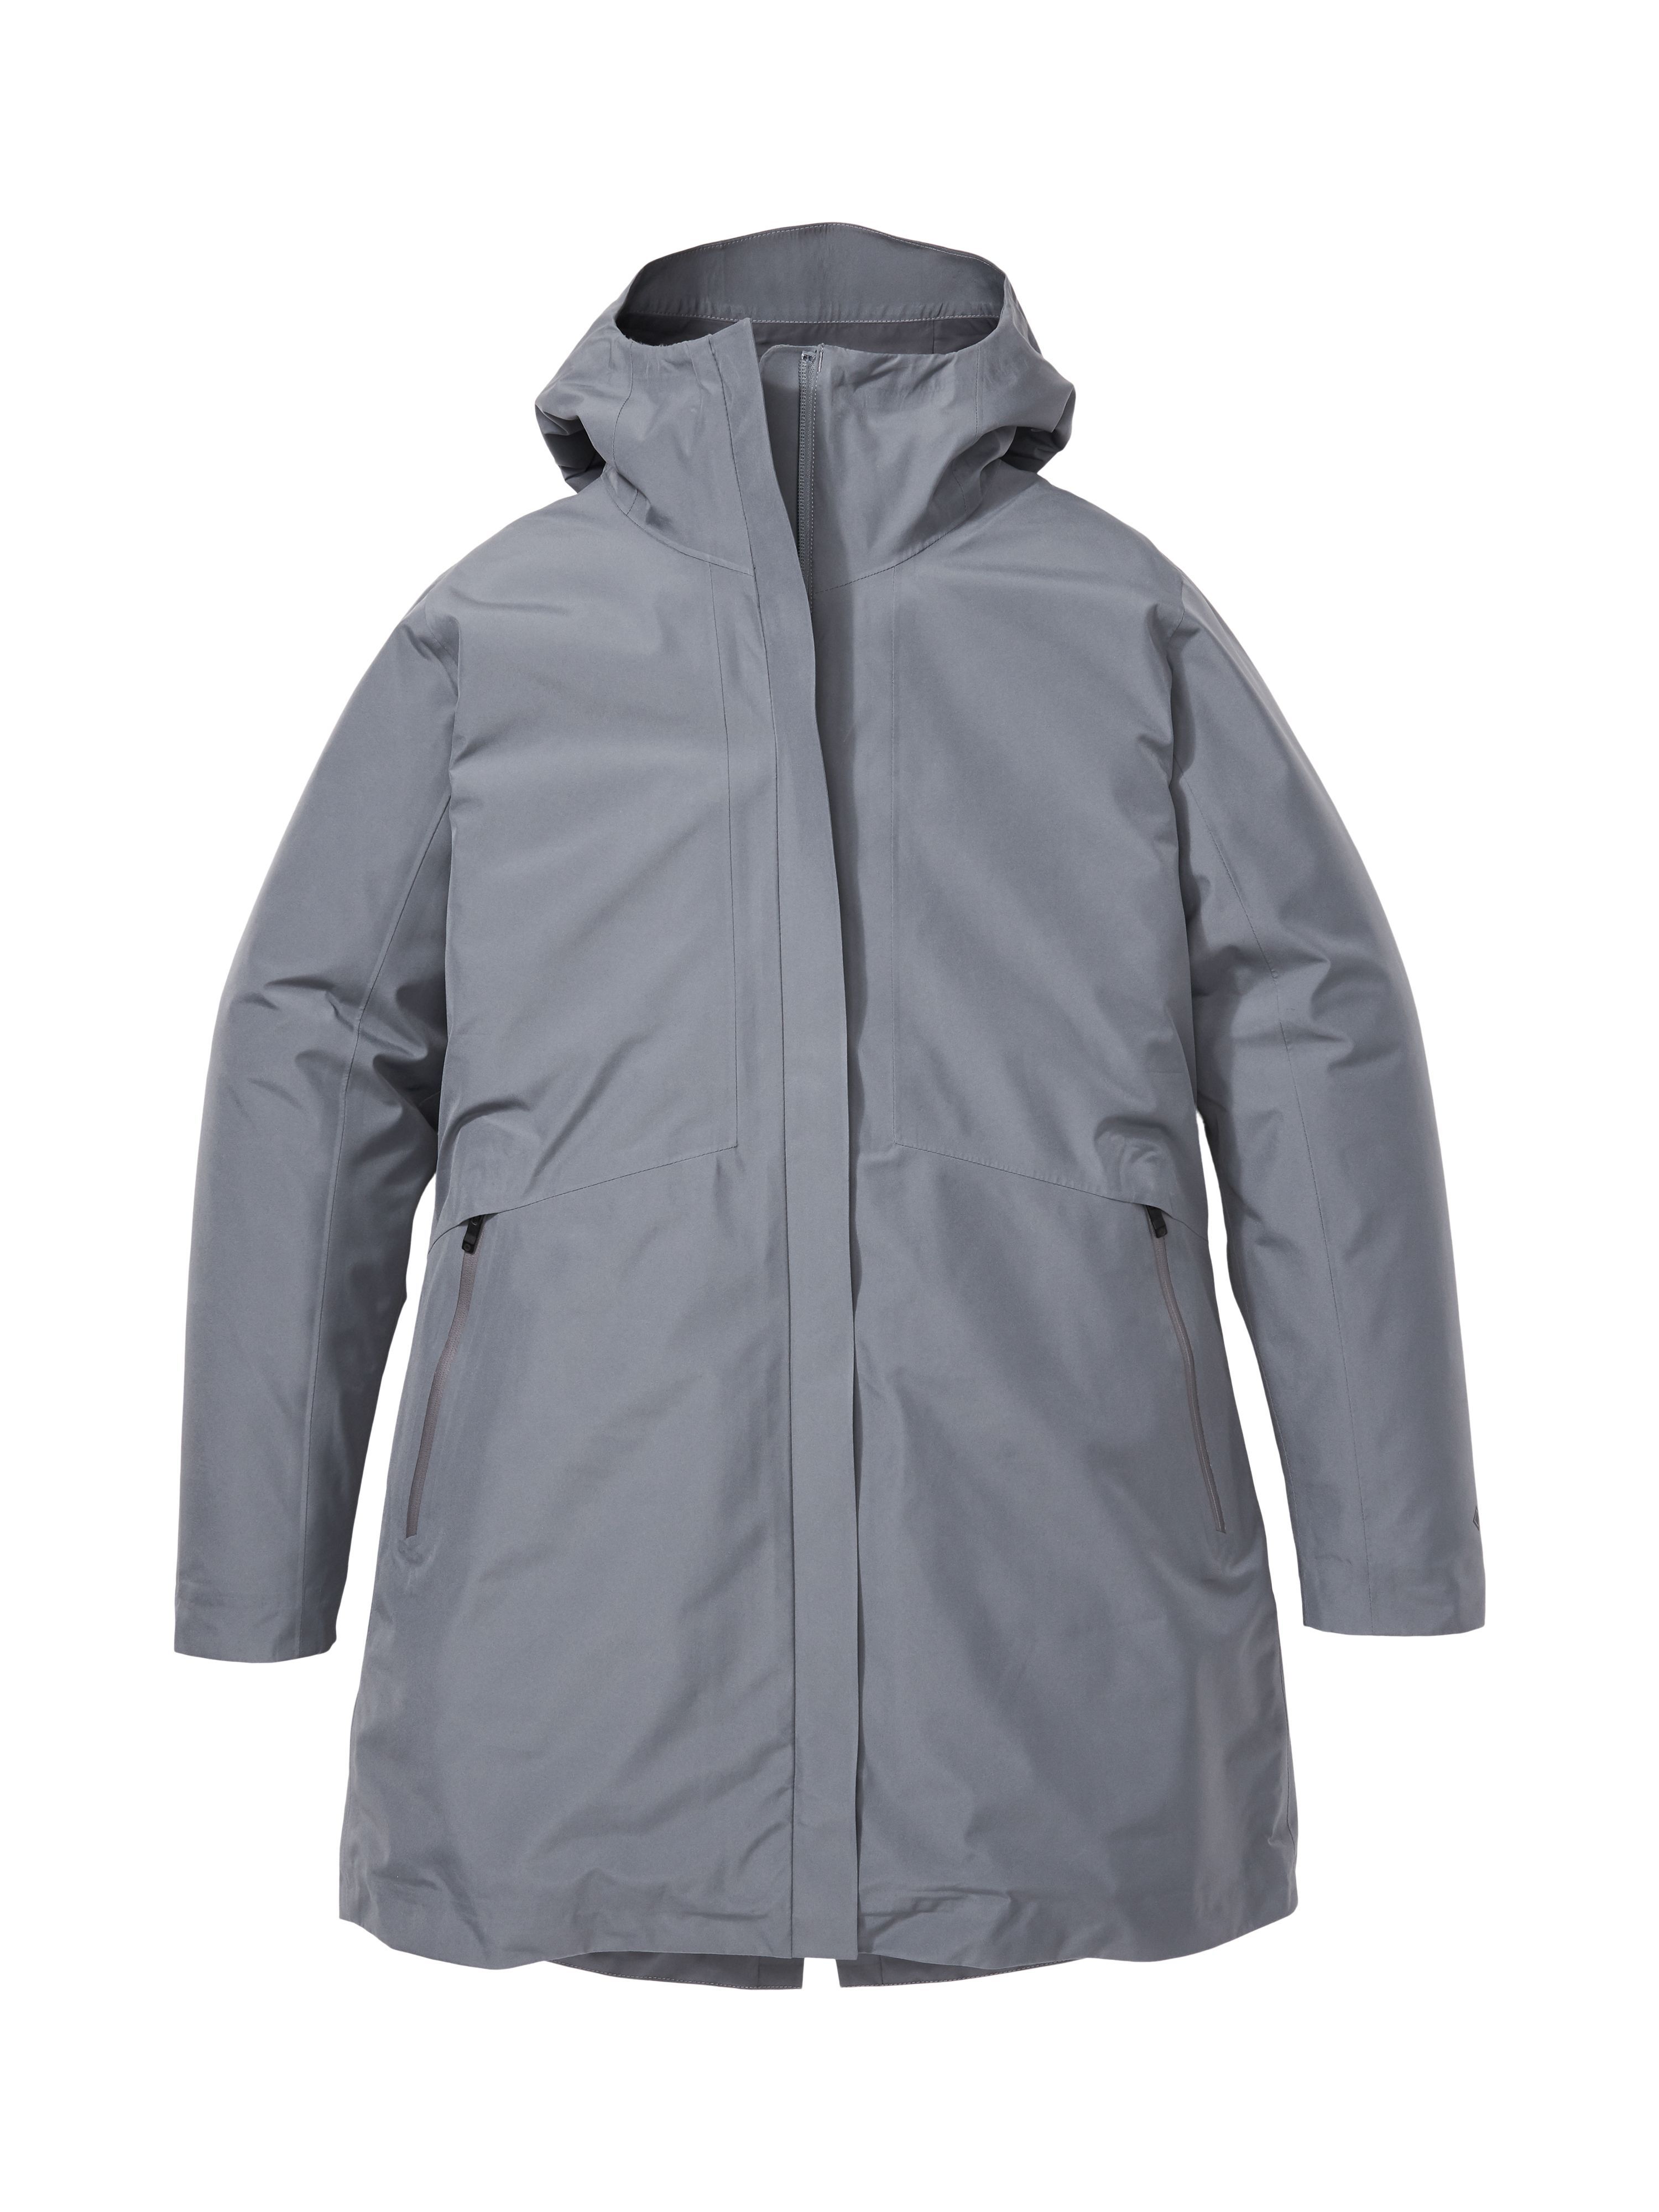 Marmot Bleeker Component Jacket - Giacca doppia - Donna